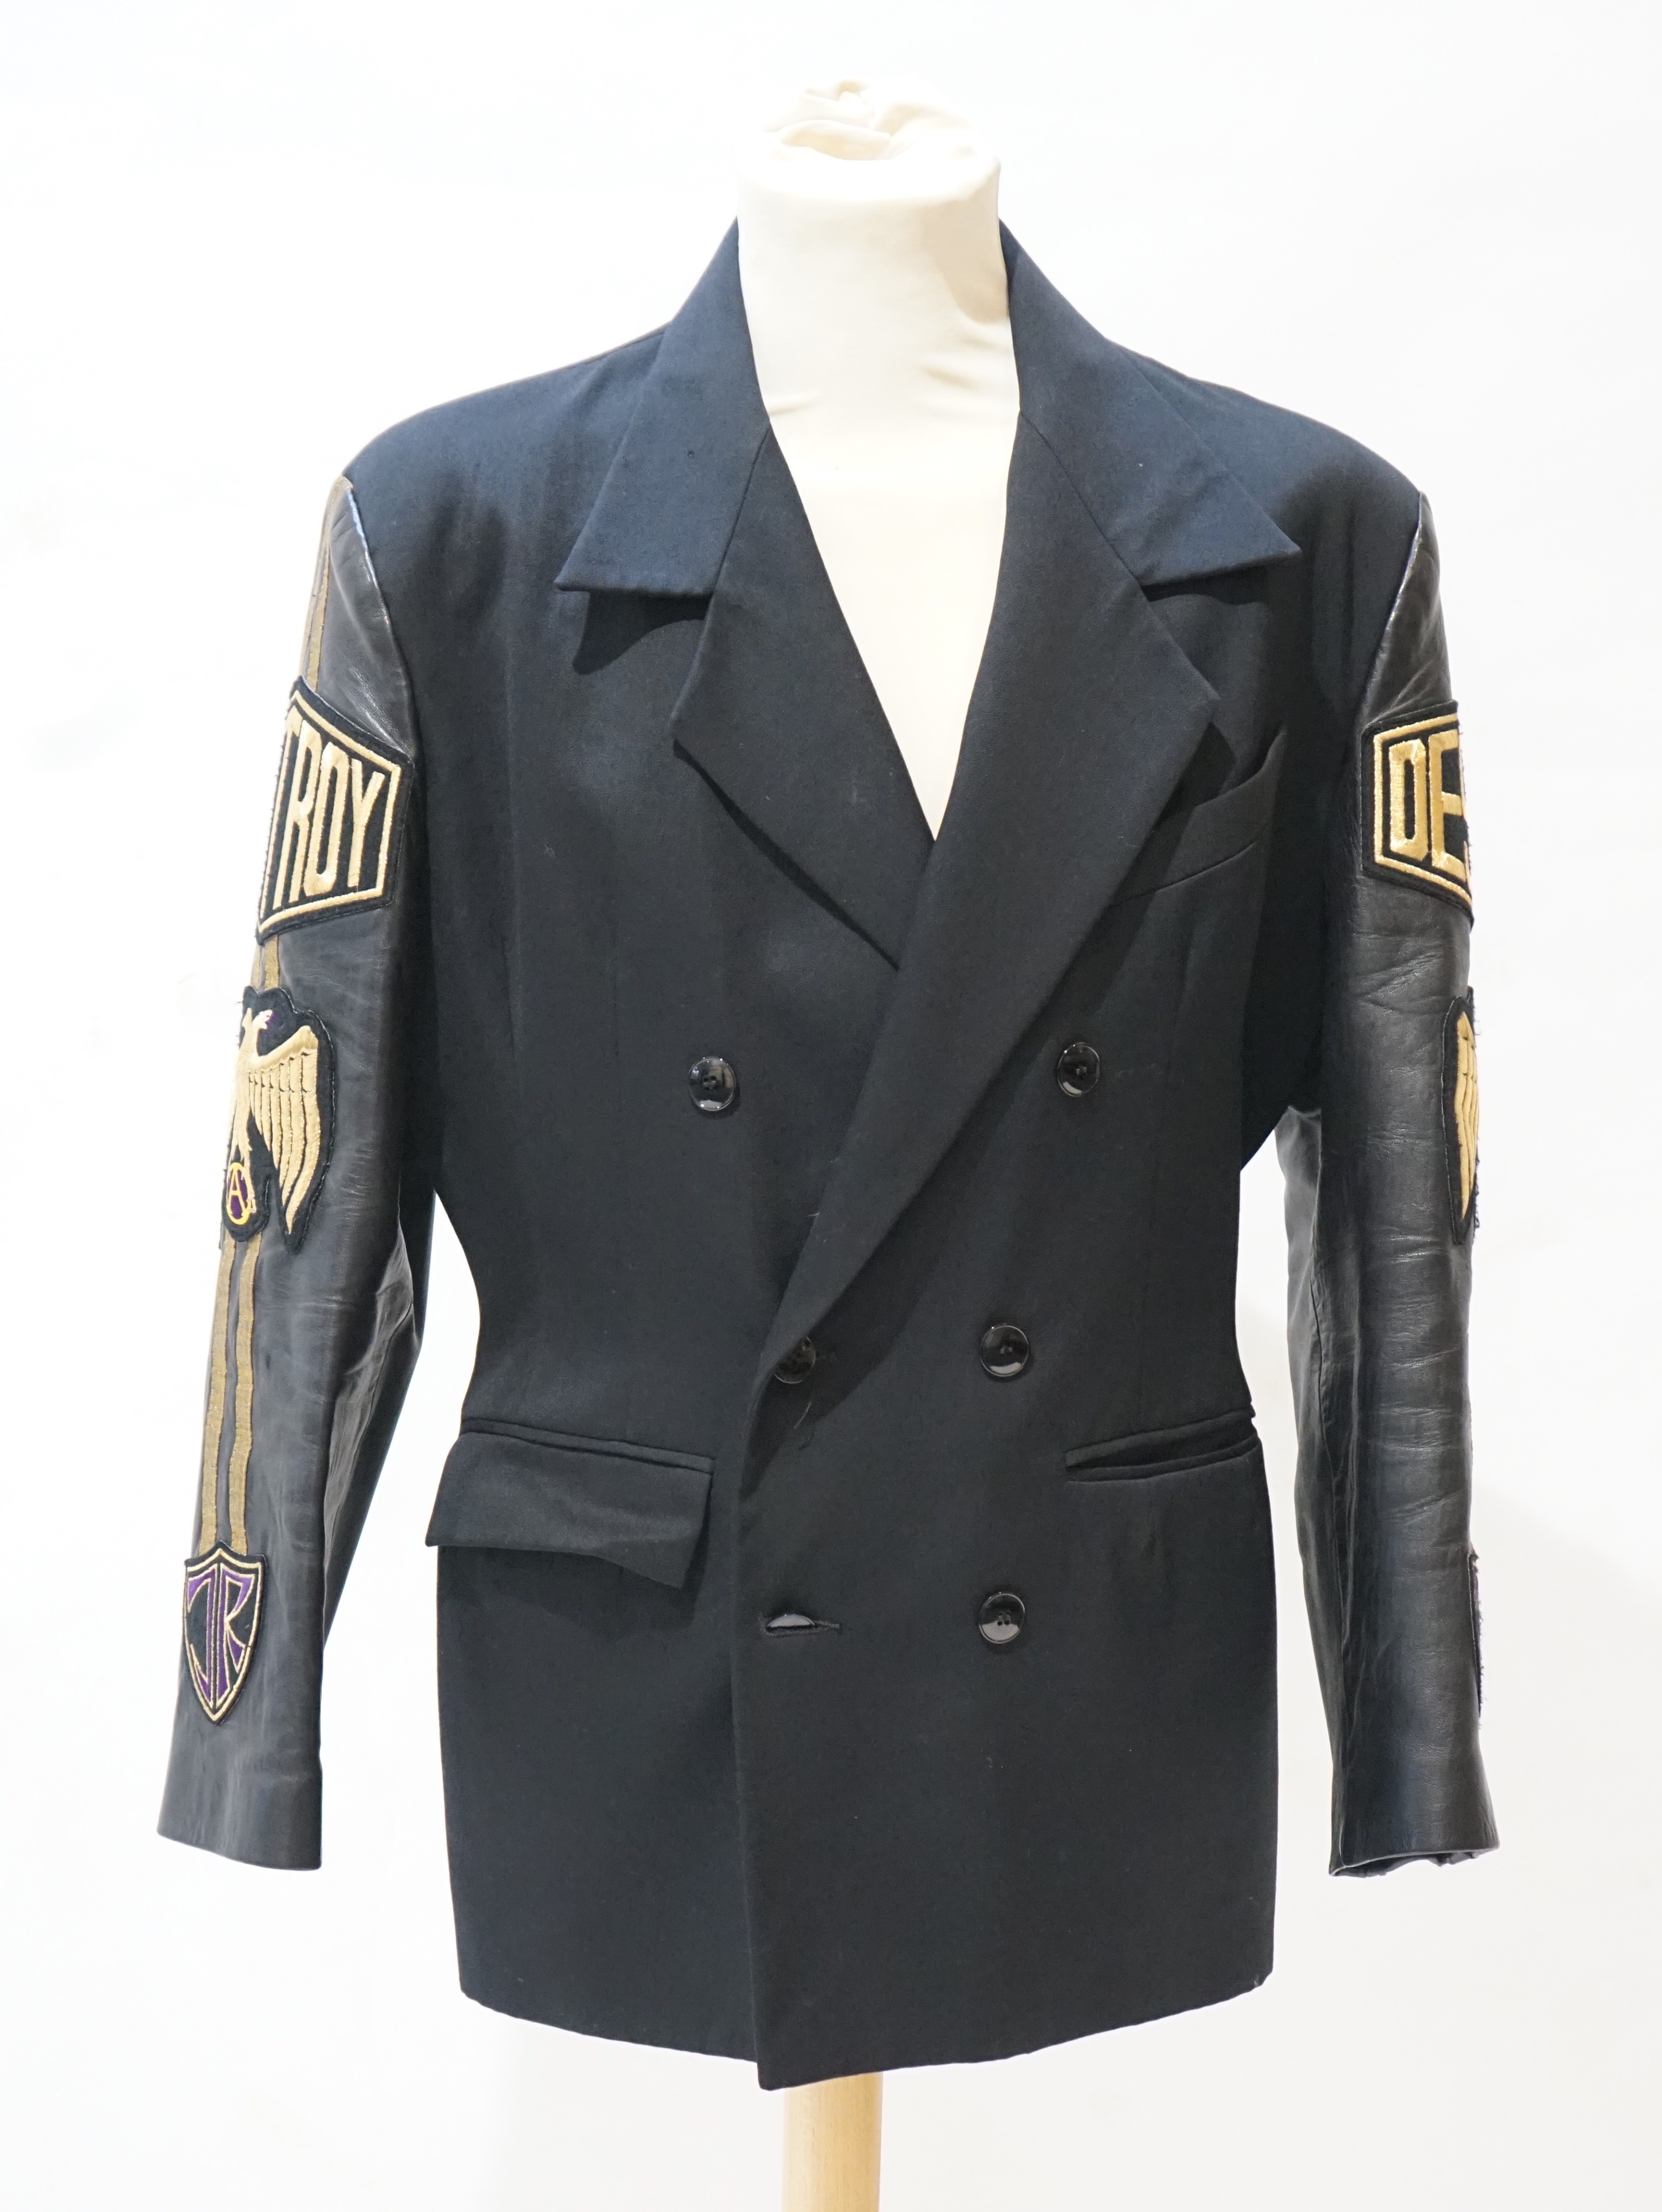 A gentleman's John Richmond double breasted wool jacket with 'Destroy' embroidered leather sleeves, size medium                                                                                                             